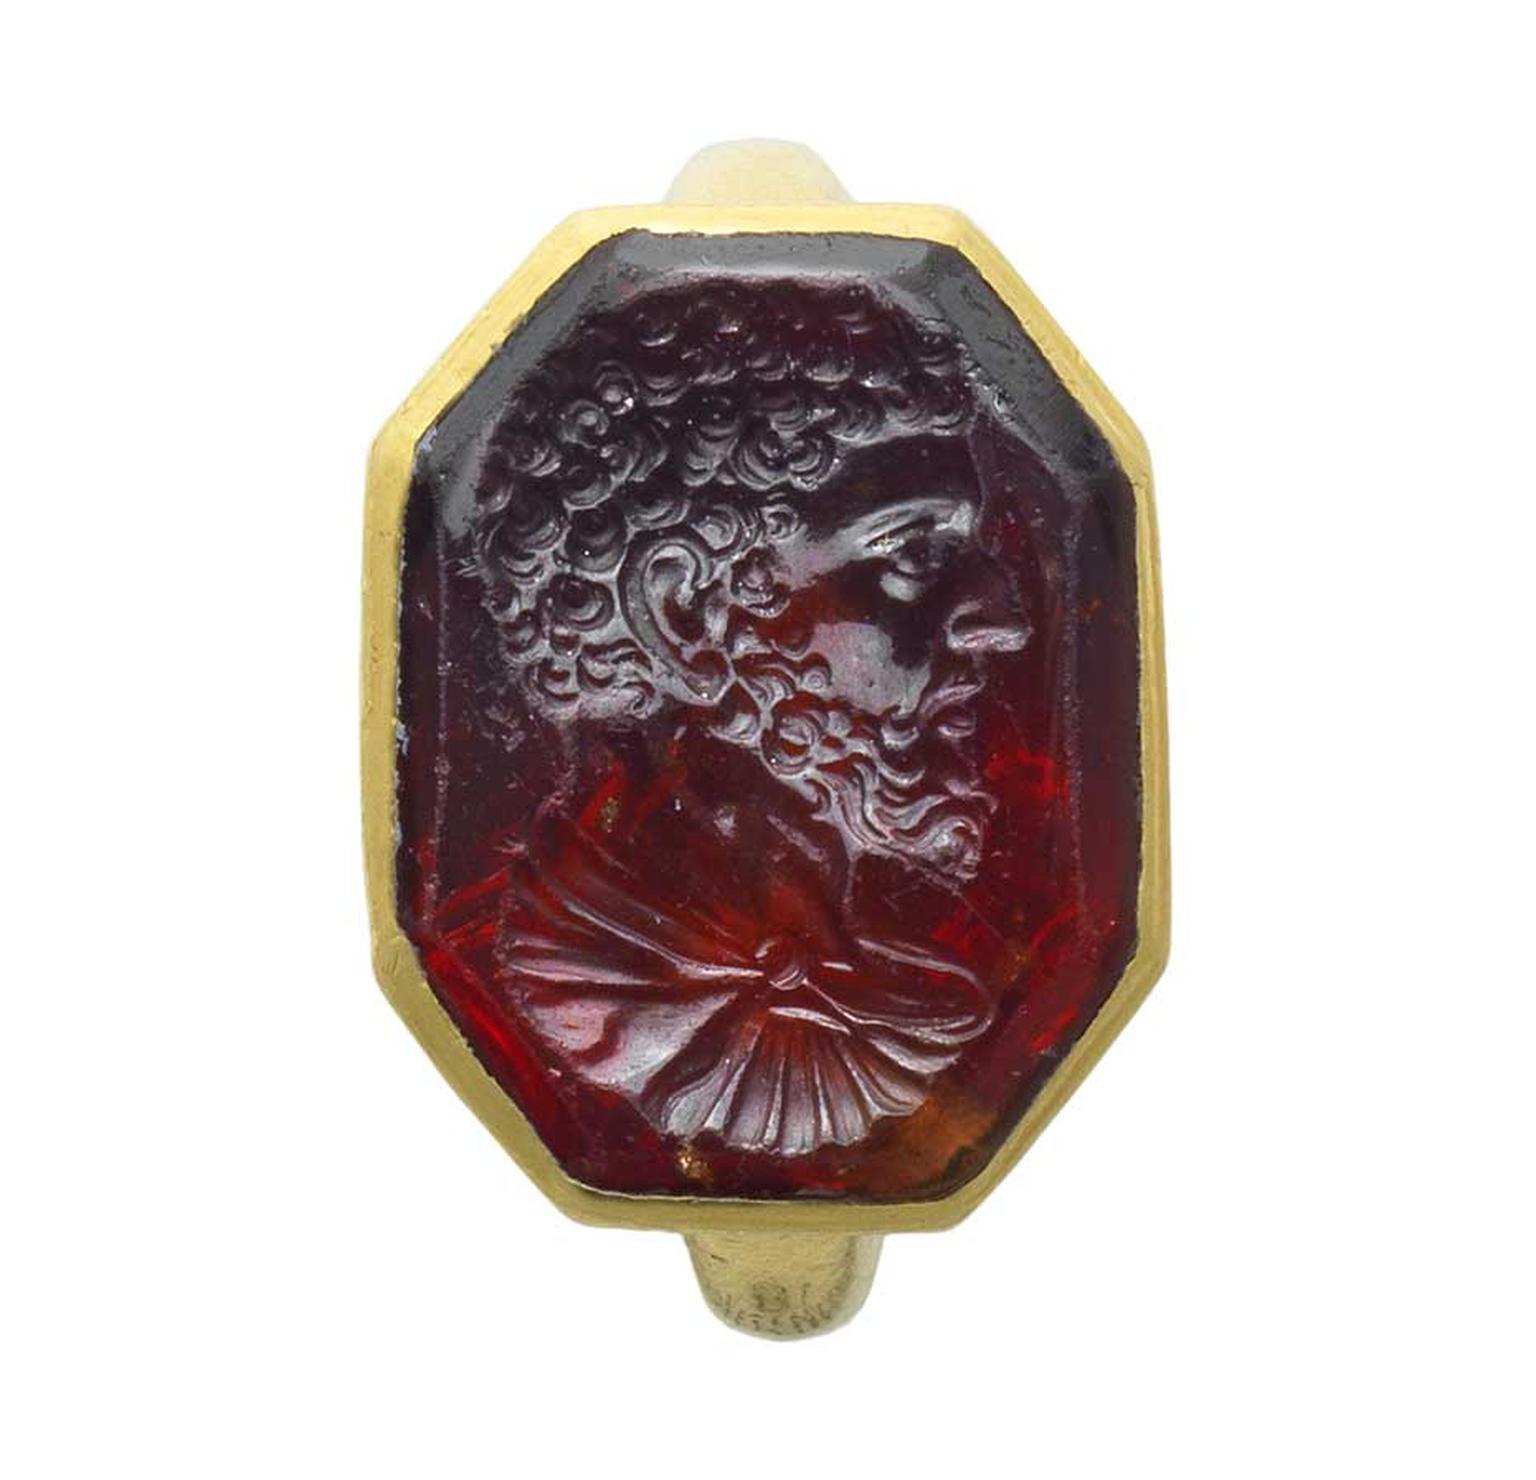 The top lot in the Bonhams Ceres Collection auction was an octagonal intaglio ring in red garnet depicting Roman Emperor Marcus Aurelius. The ring, which was made in the 18th-19th century, soared past its pre-sale estimate of £1,000-1,500 to eventually se